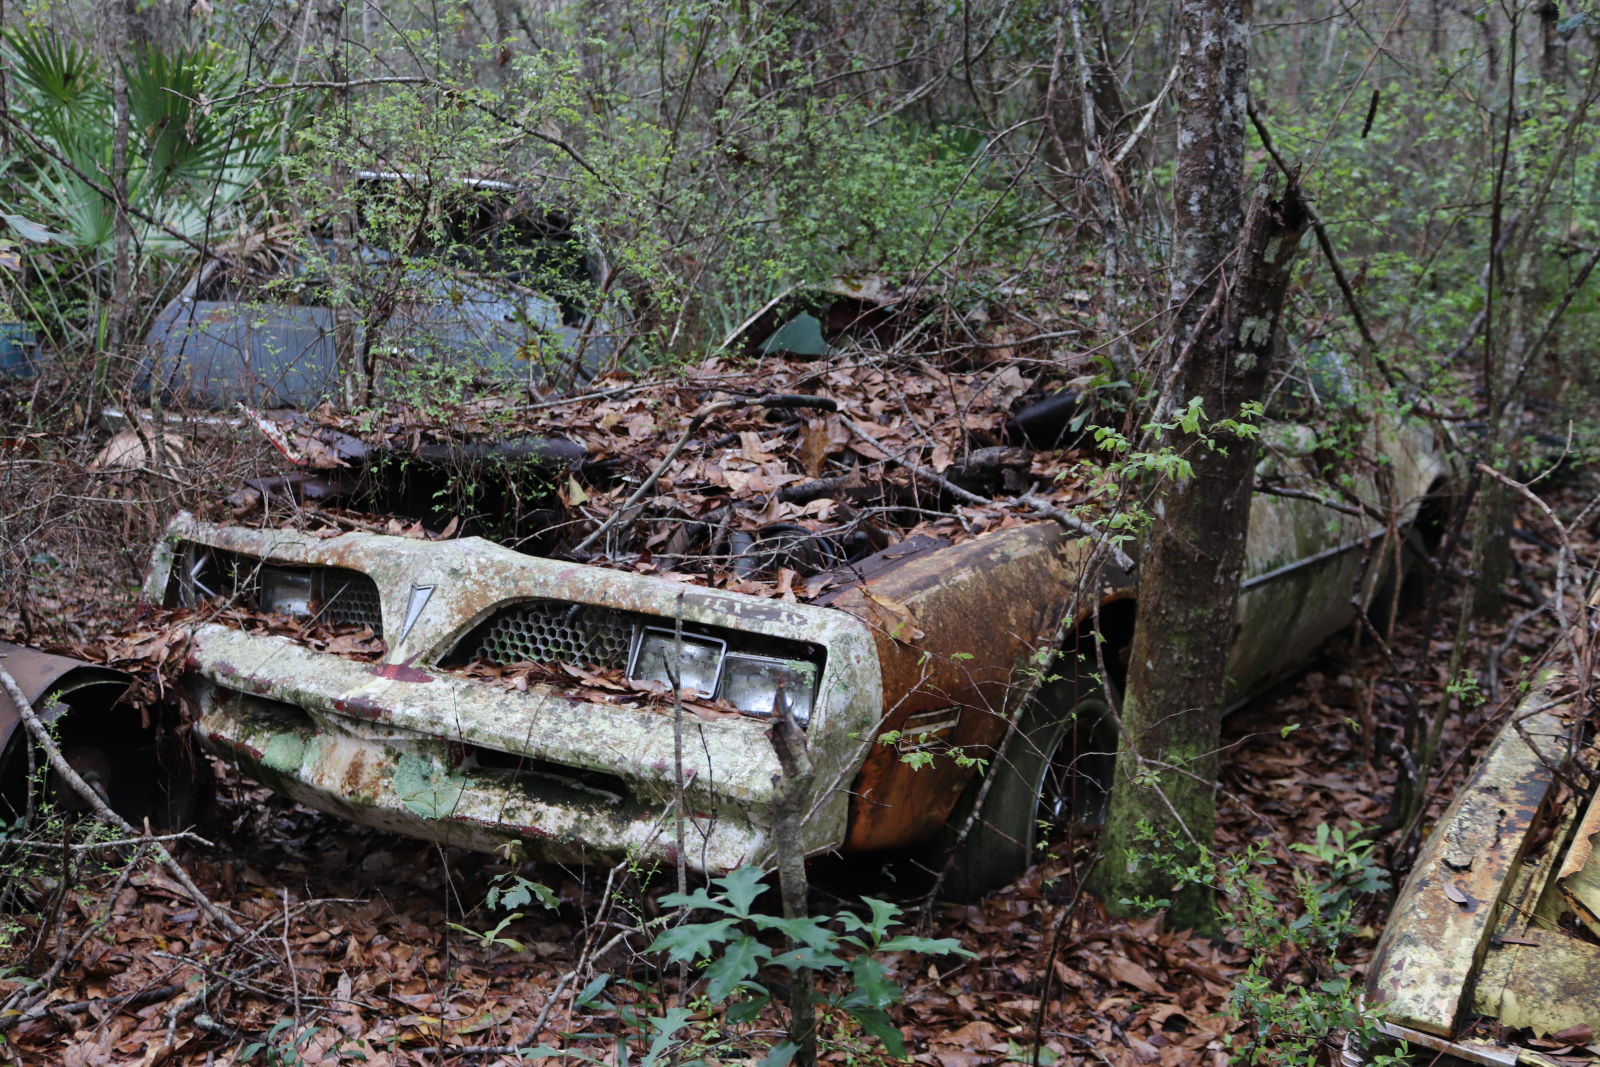 1978 Trans am rotting away in the swamp of the Gulf Coast.